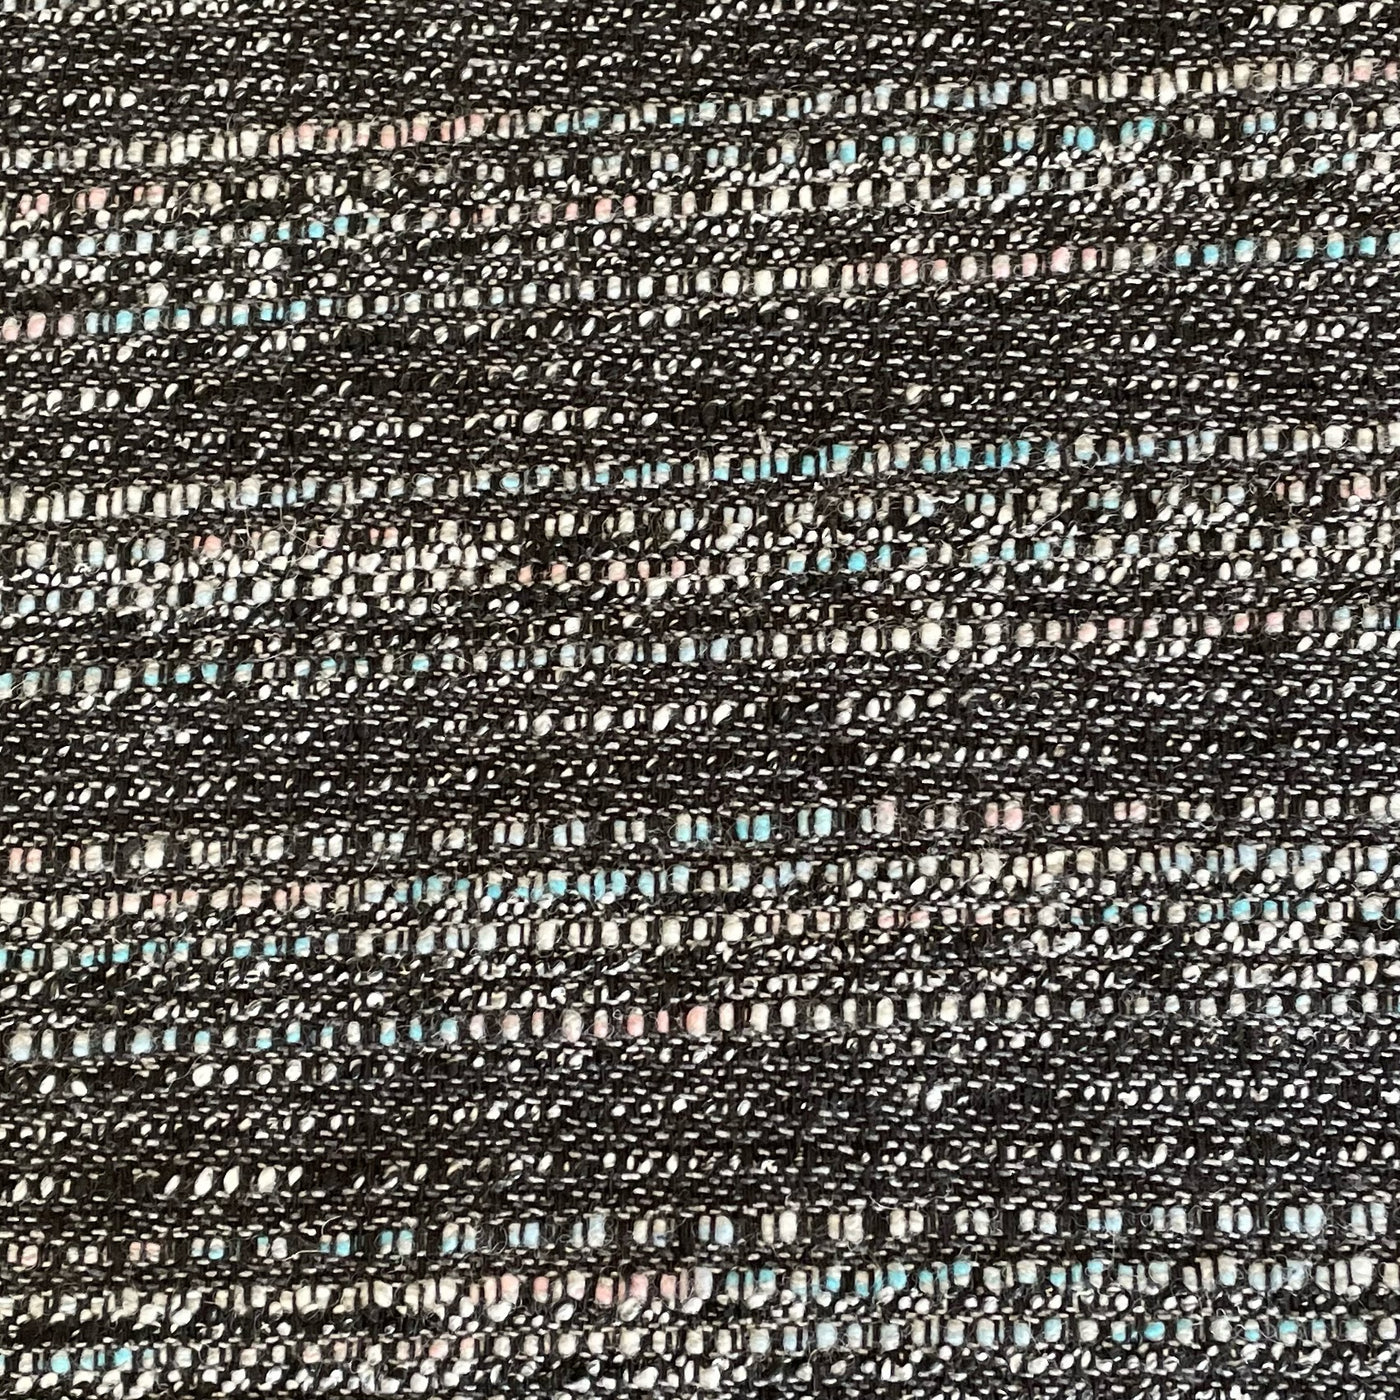 multicoloured boucle fabric, ideal for a jacket or coat, beautiful slubs of pink, turquoise